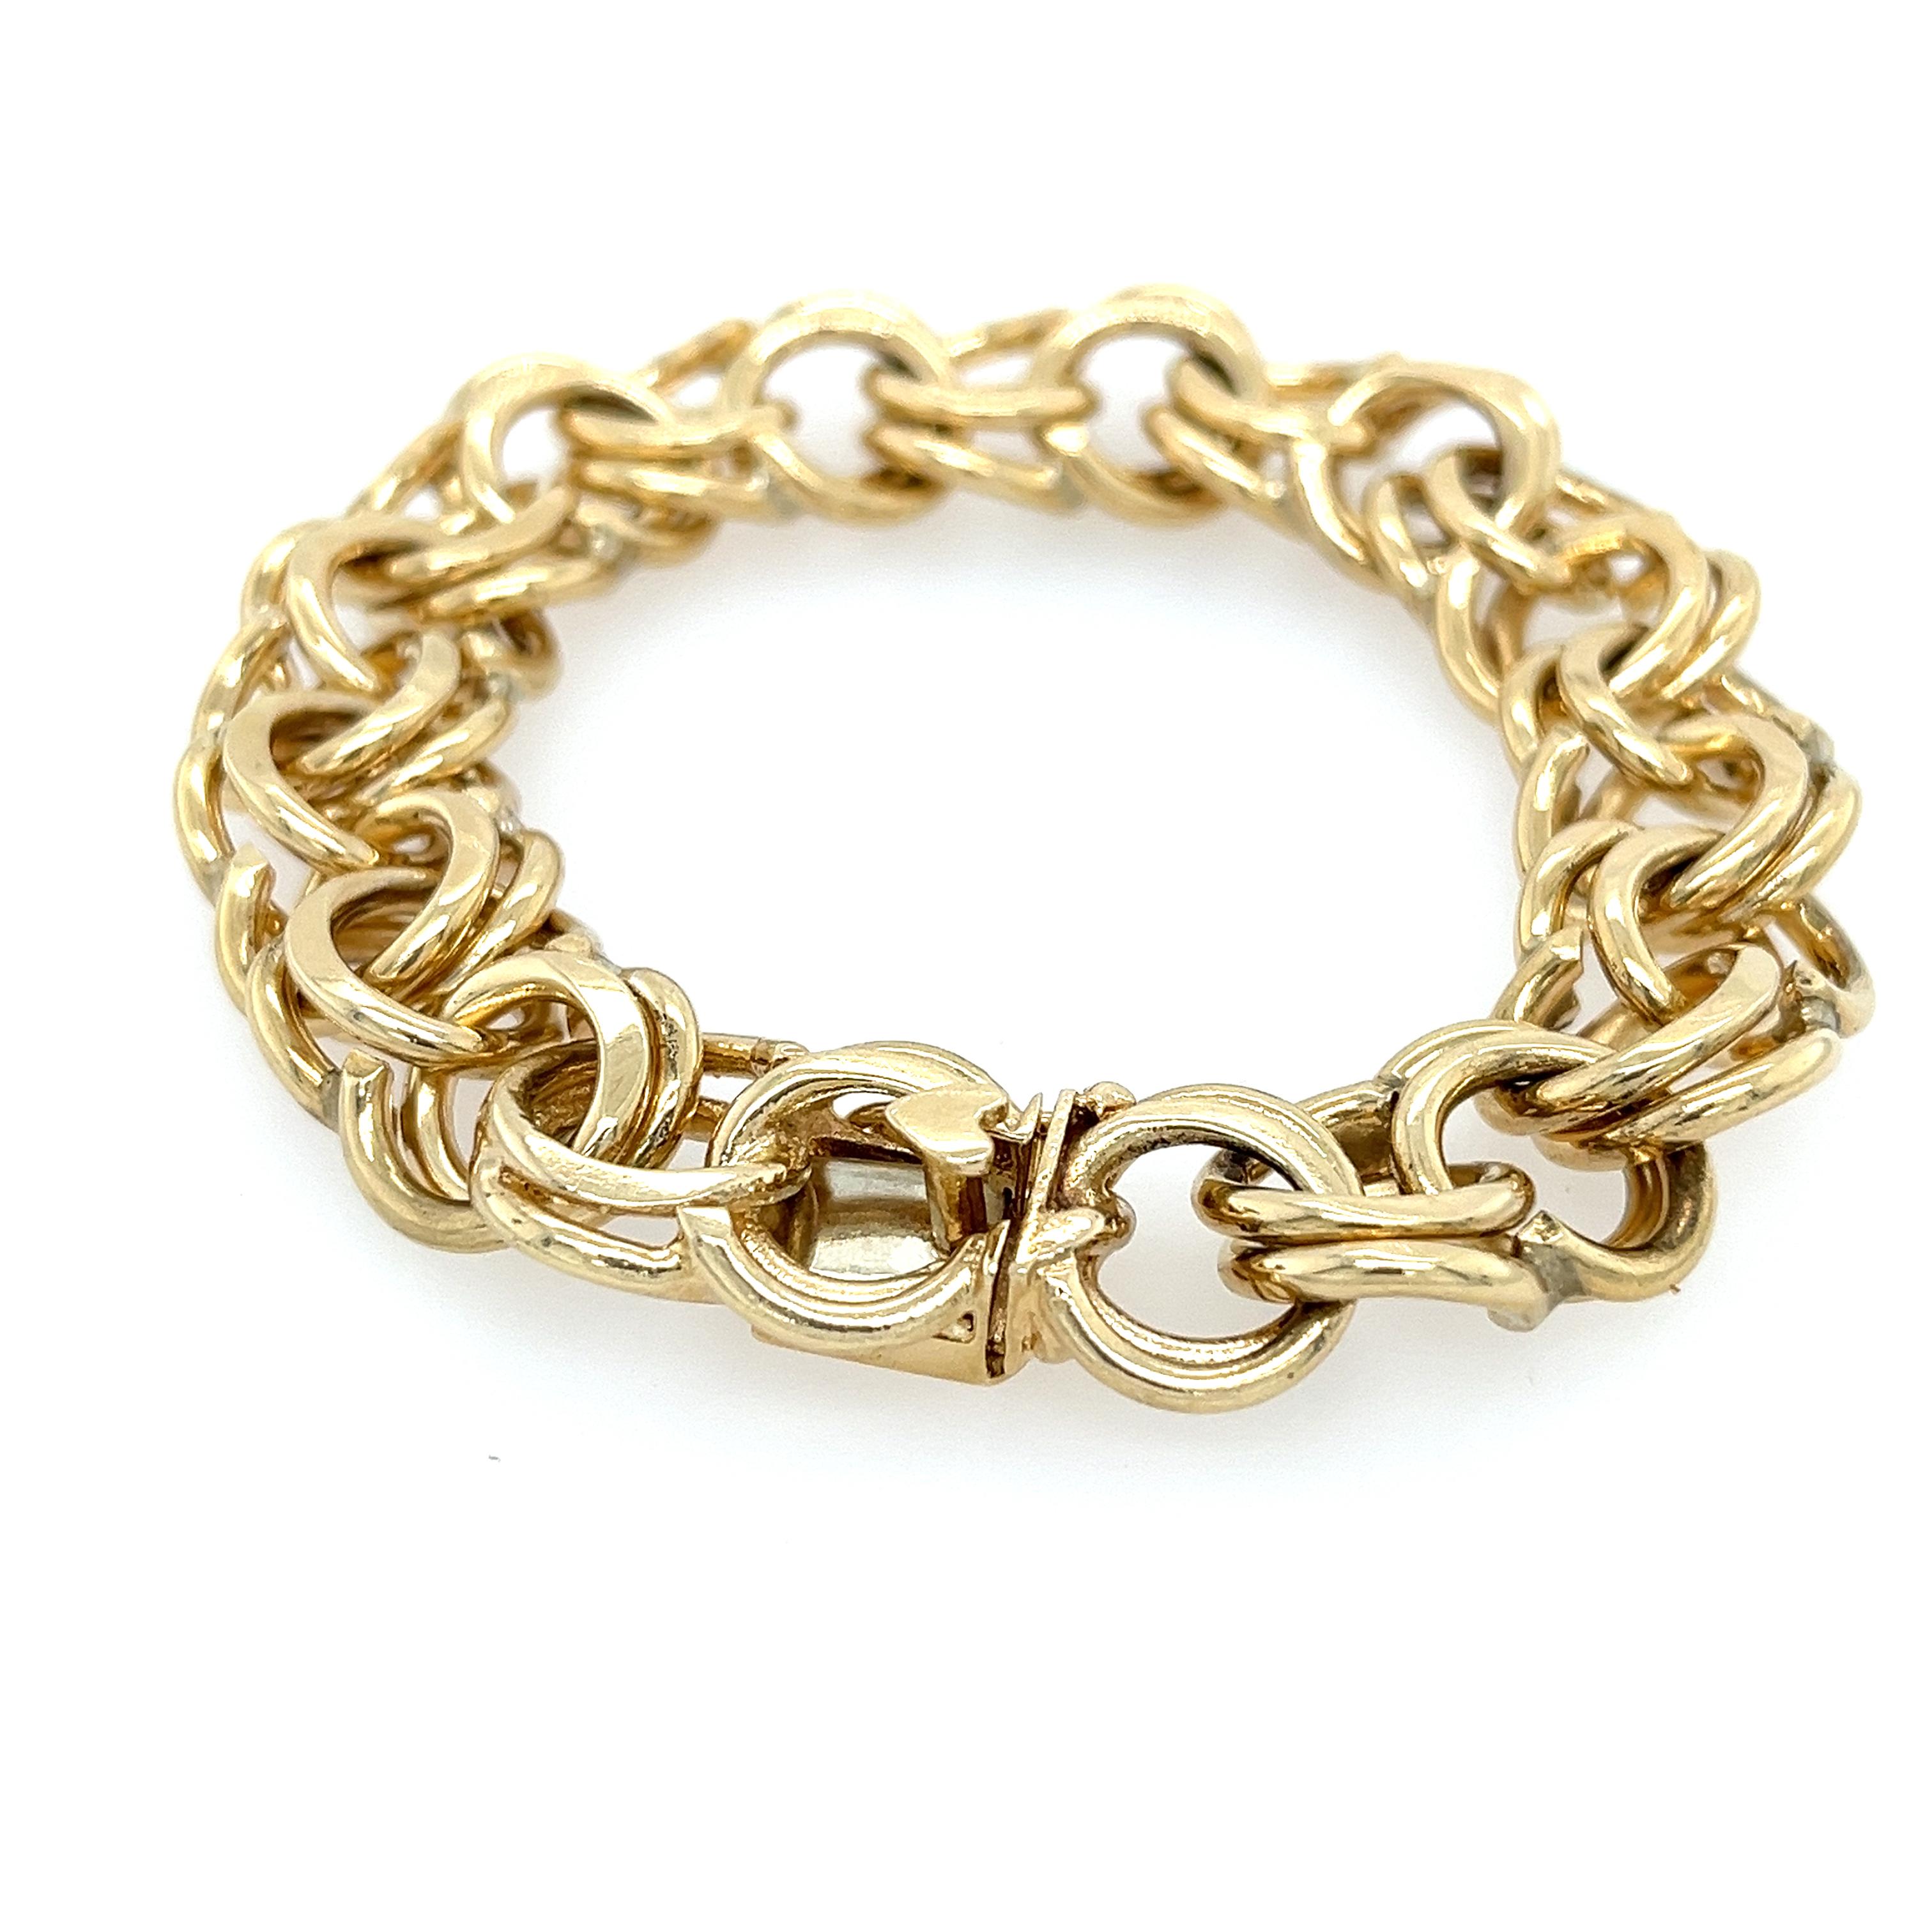 Vintage Heavy Double Link Yellow Gold Charm Bracelet In Excellent Condition For Sale In Delray Beach, FL